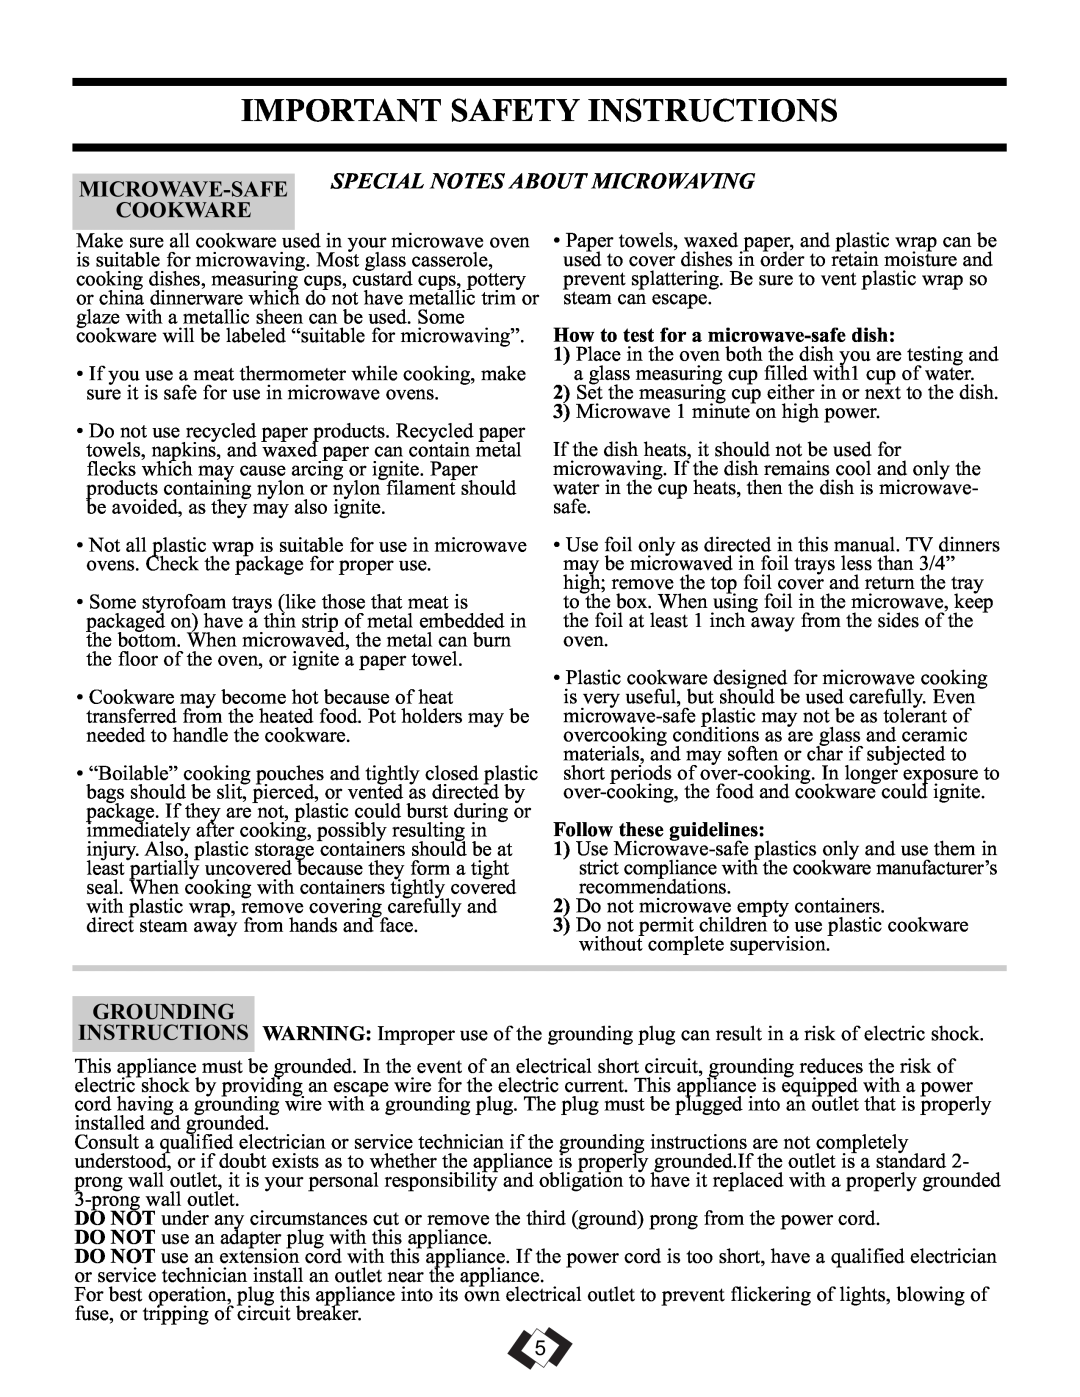 Danby DMW099BLSDD Important Safety Instructions, Grounding, How to test for a microwave-safedish, Follow these guidelines 